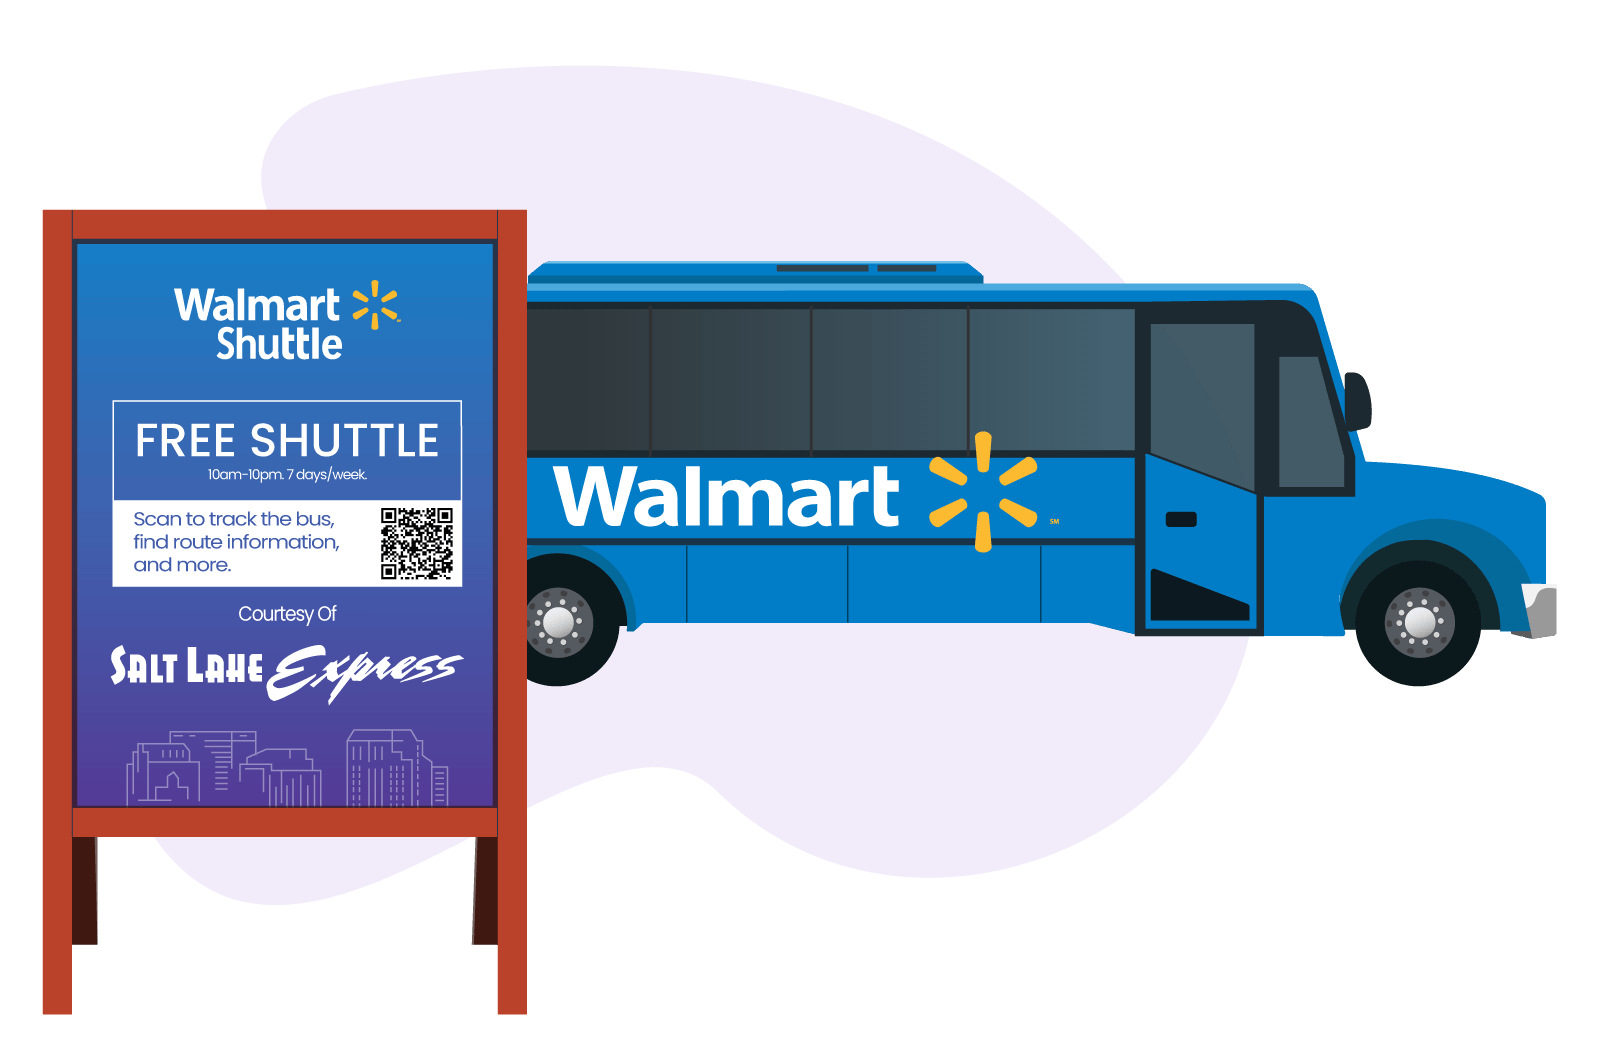 From-Aisles-to-Arrival-Introducing-the-Walmart-Shuttle-Tracker-for-Salt-Lake-Express-pichi